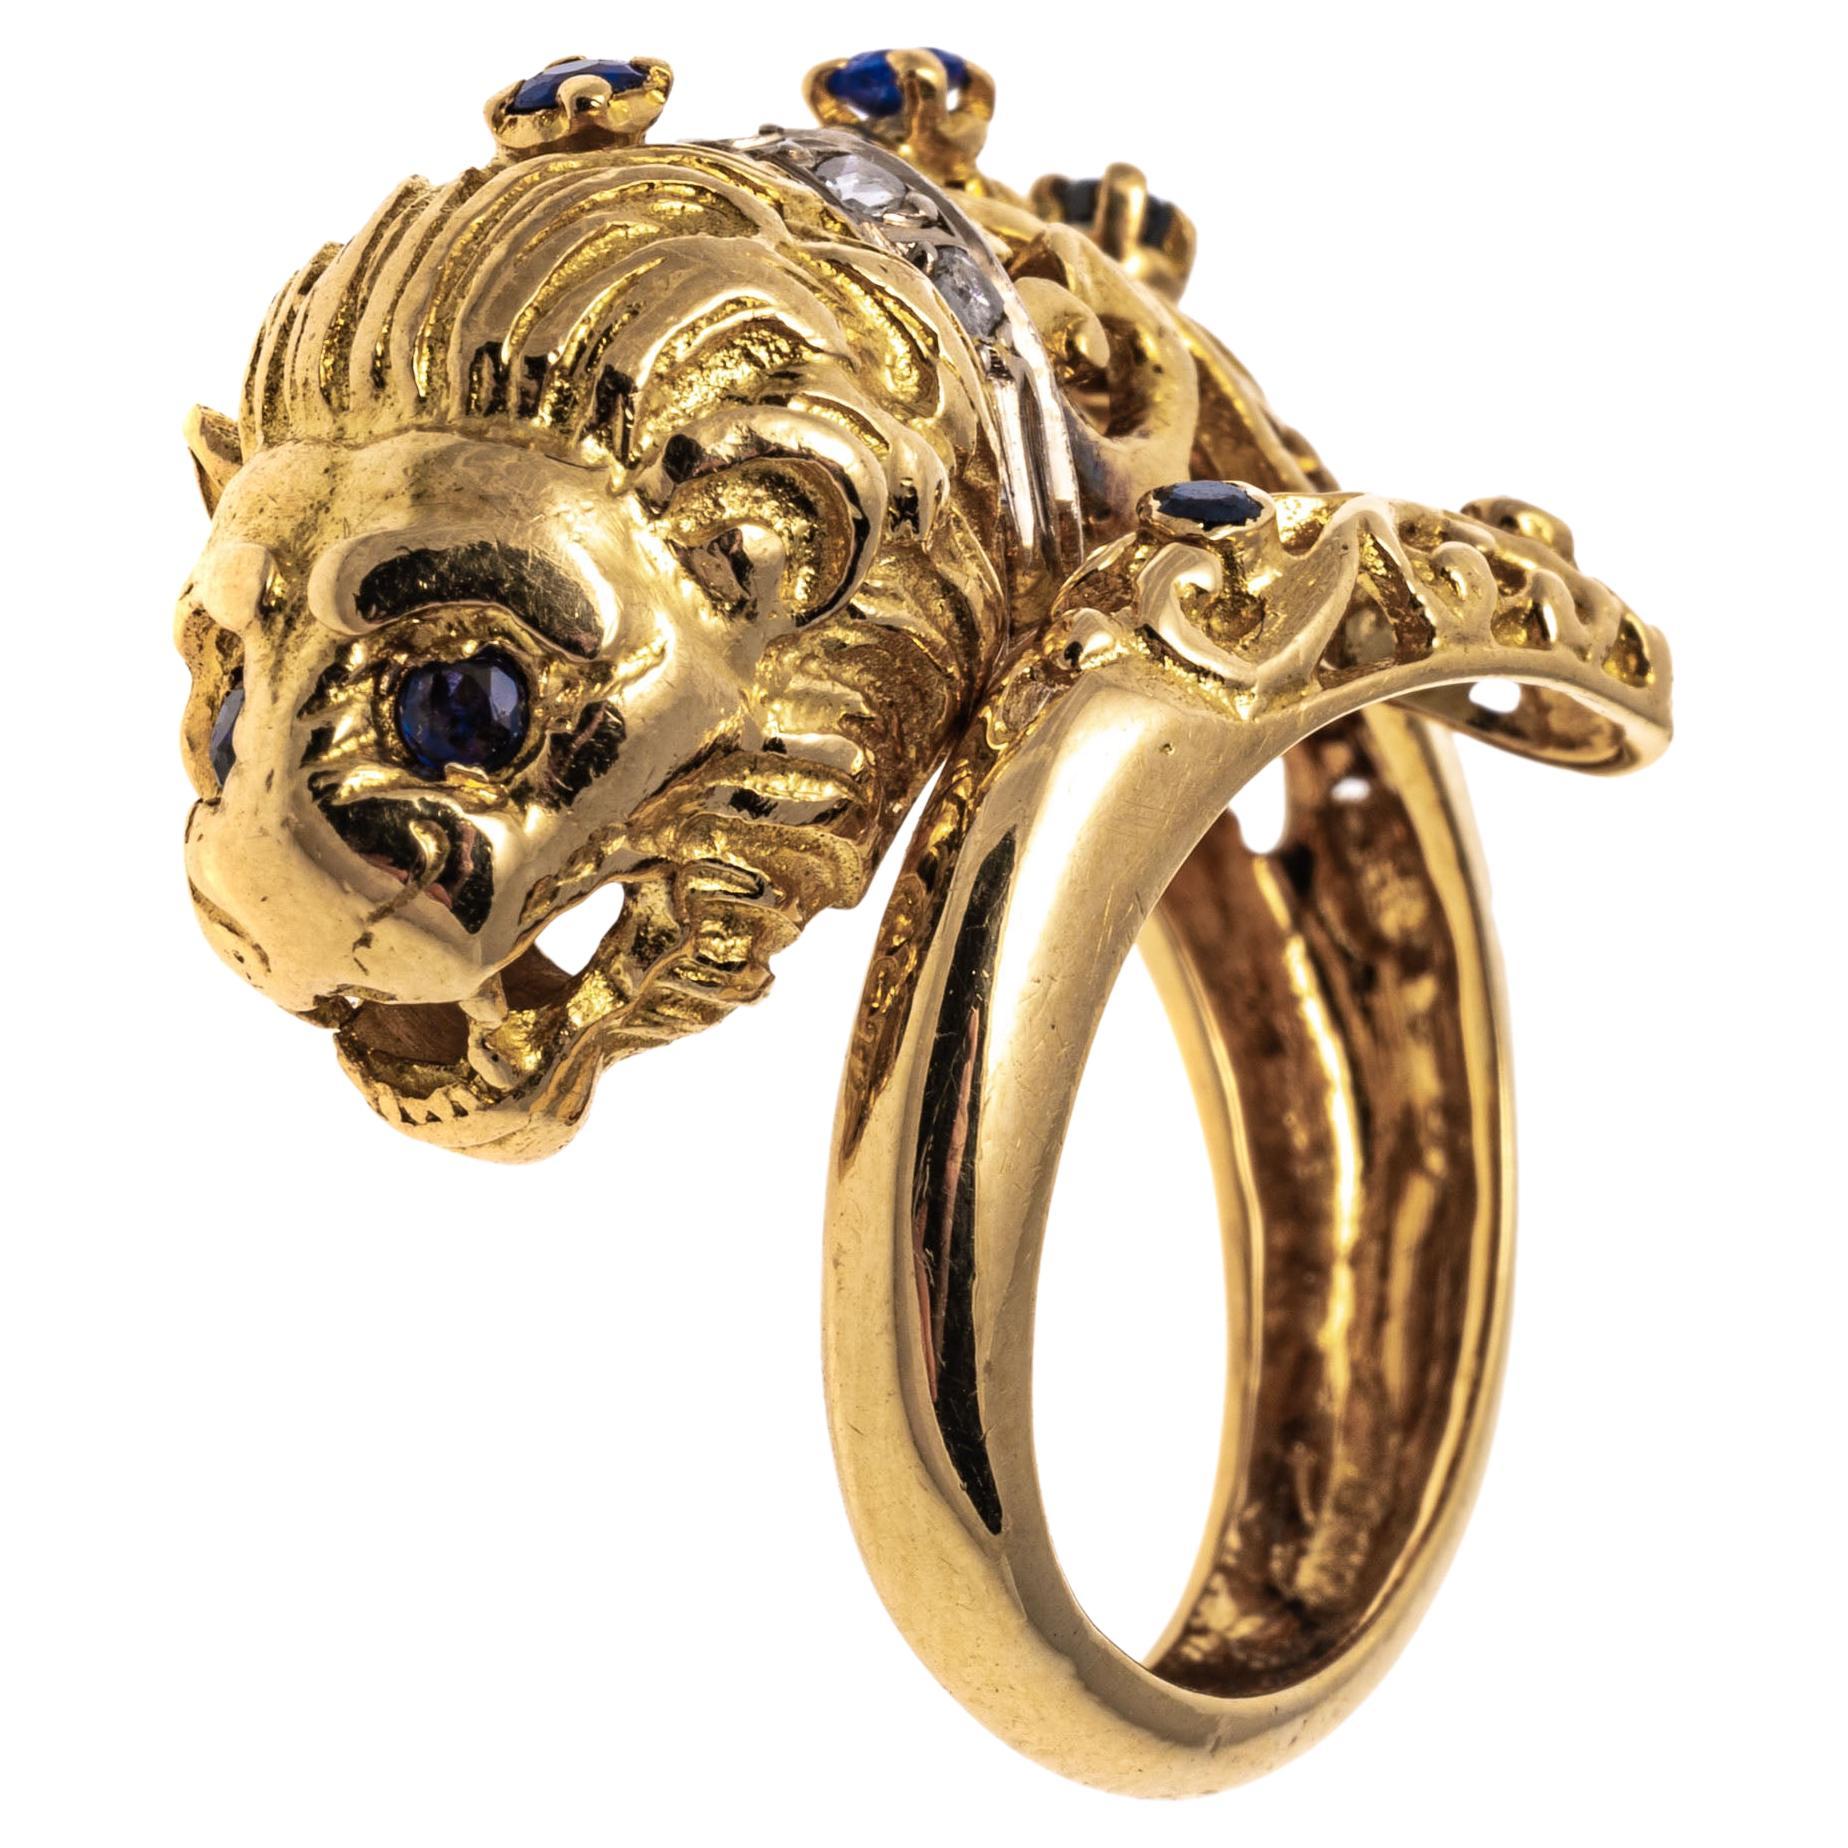 14k yellow gold ring. This striking, ornate yellow gold bypass ring has a center high polished finished, figural lions head, with round faceted sapphires set in the eyes and studded down the backs, approximately 0.25 TCW and decorated with a collar